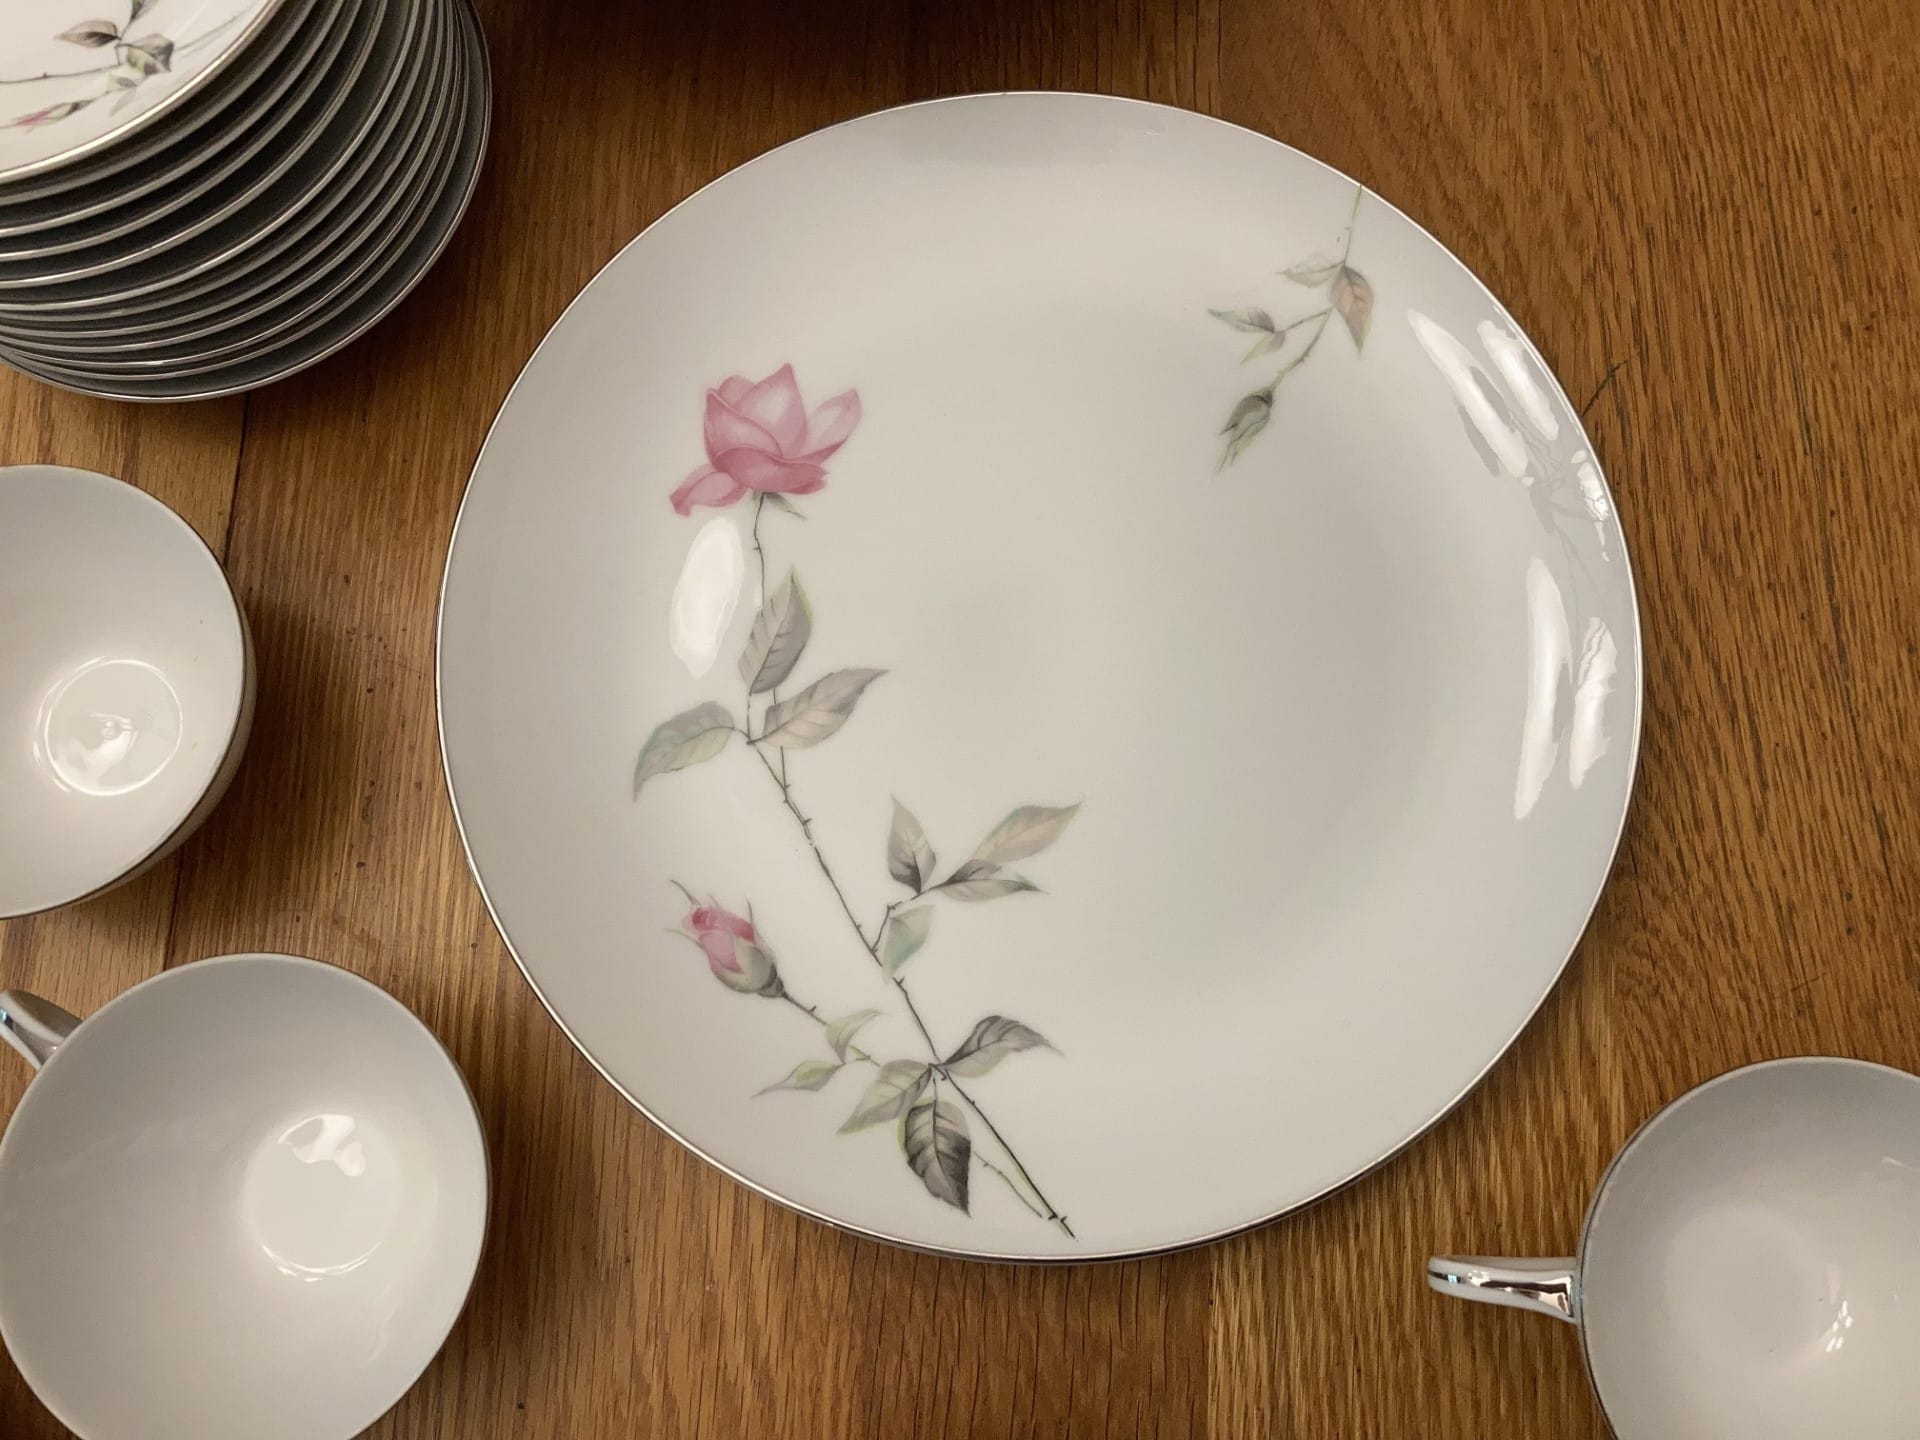 “Dawn Rose” design of 69 piece fine China dishes set from Style House brand, made in Japan